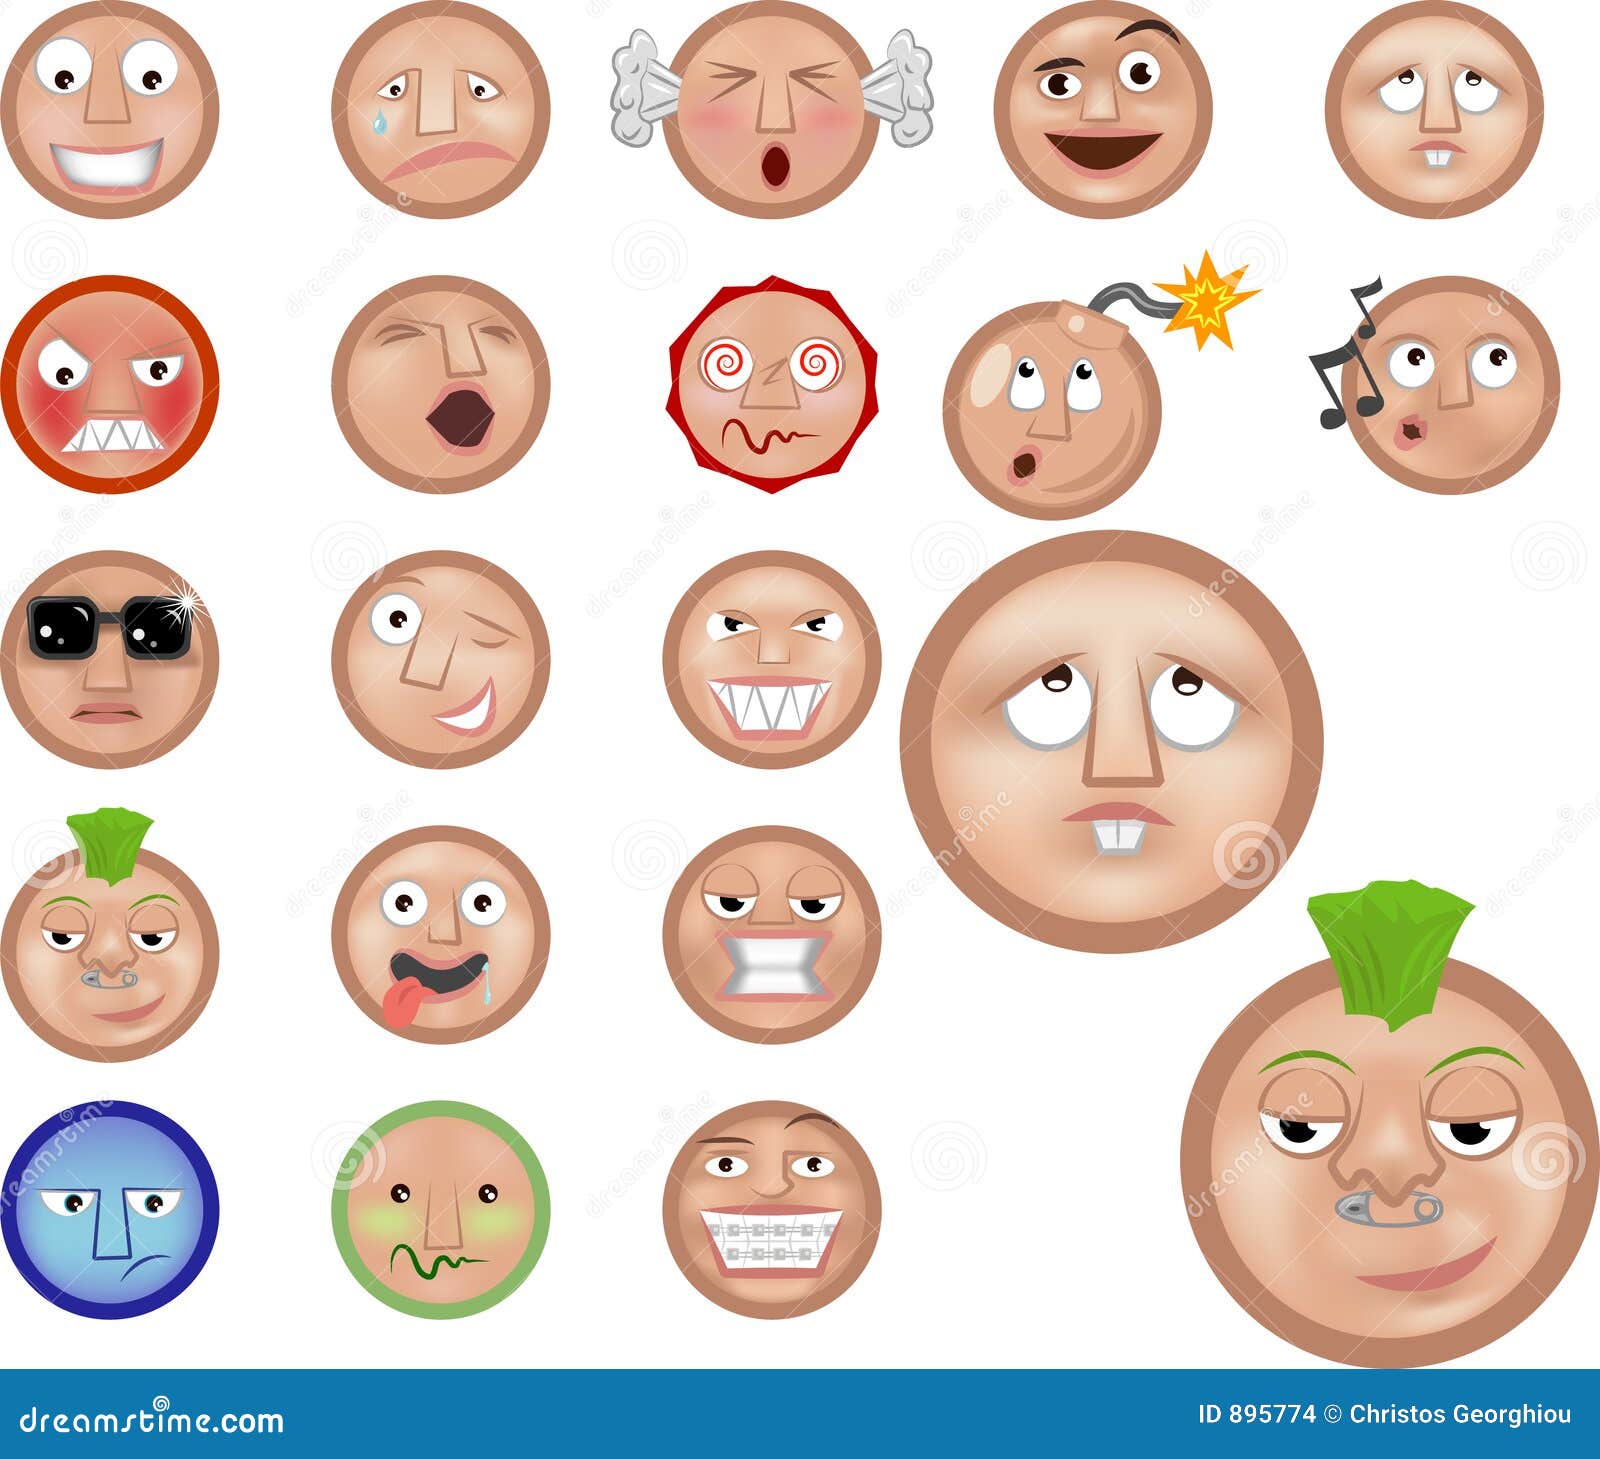 Emoticons stock vector. Illustration of head, icon, embarrassed - 895774